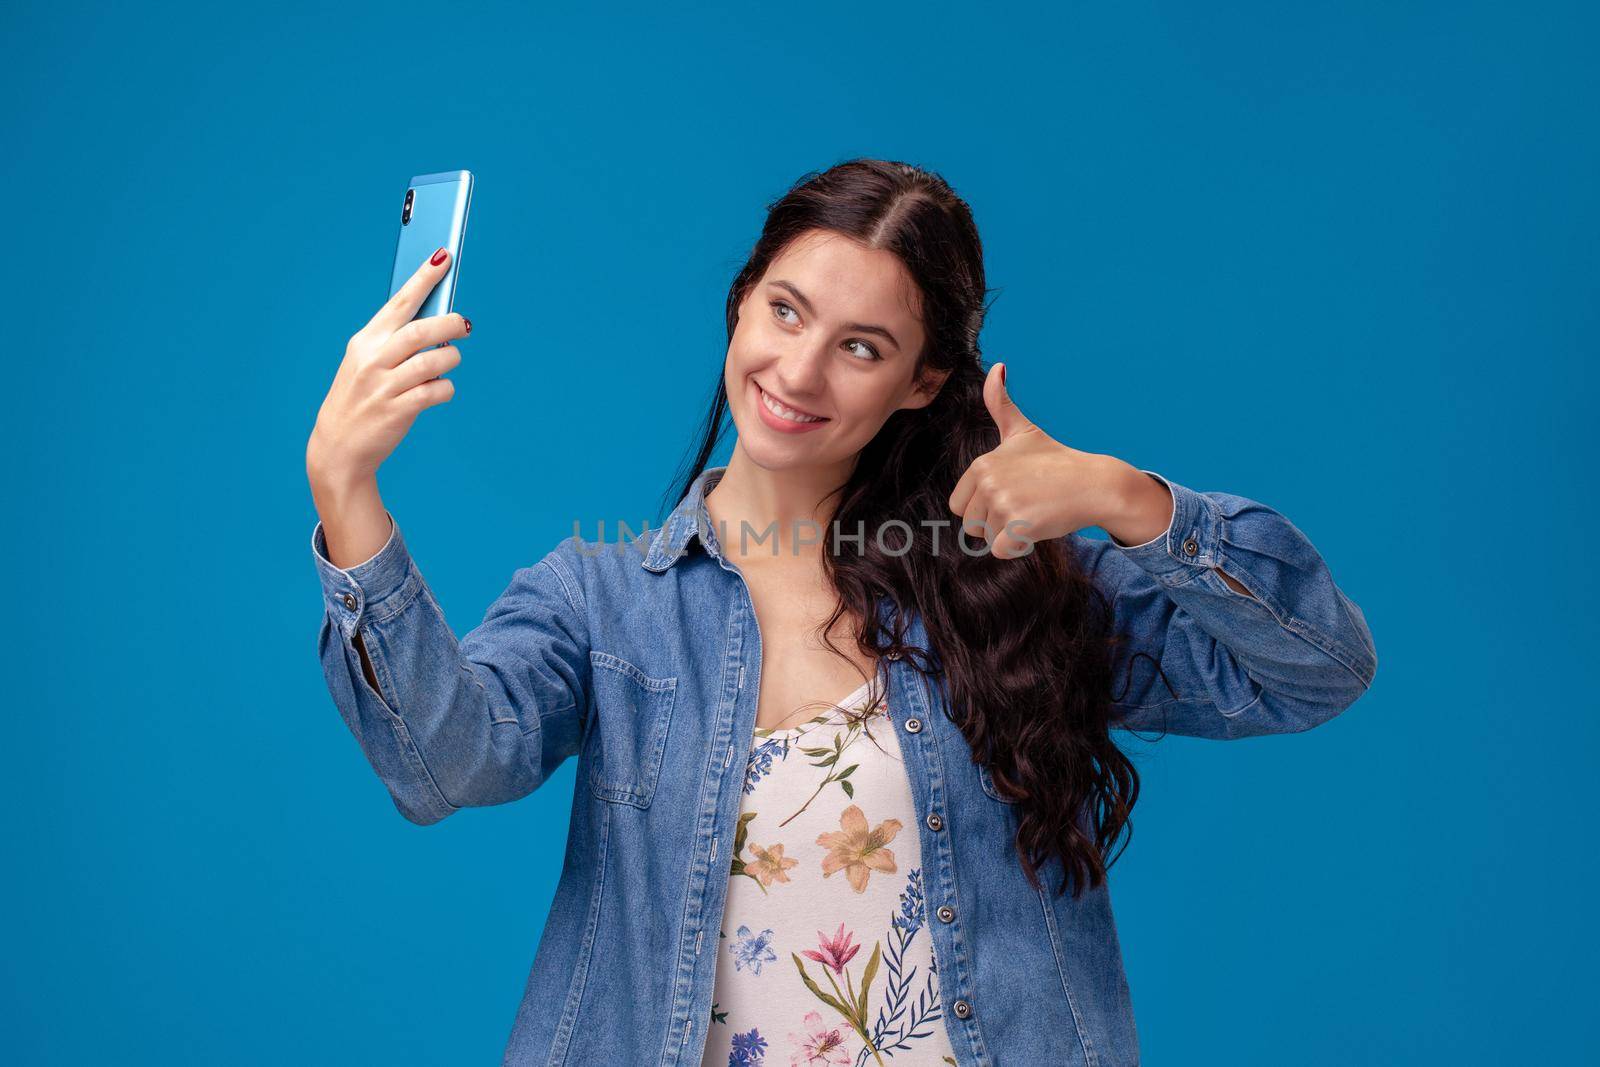 Young pretty girl in a white dress with floral print and blue denim shirt is posing with a smartphone on a blue background. She is making a selfie. People sincere emotions, lifestyle concept. Mockup copy space.